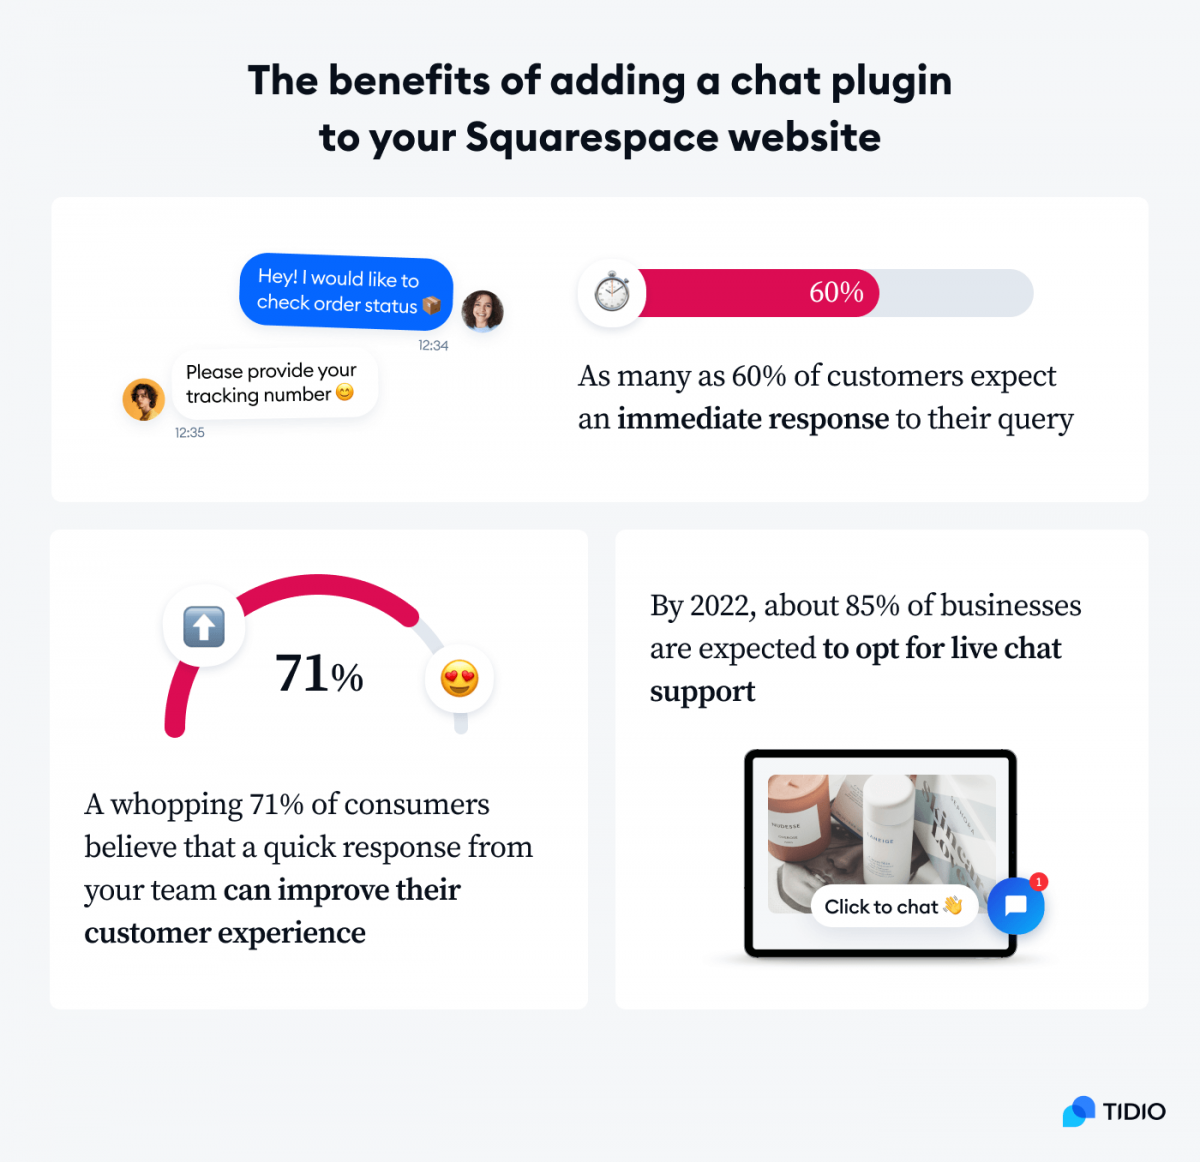 Infographic presenting the benefits of adding a chat plugin to a Squarespace website